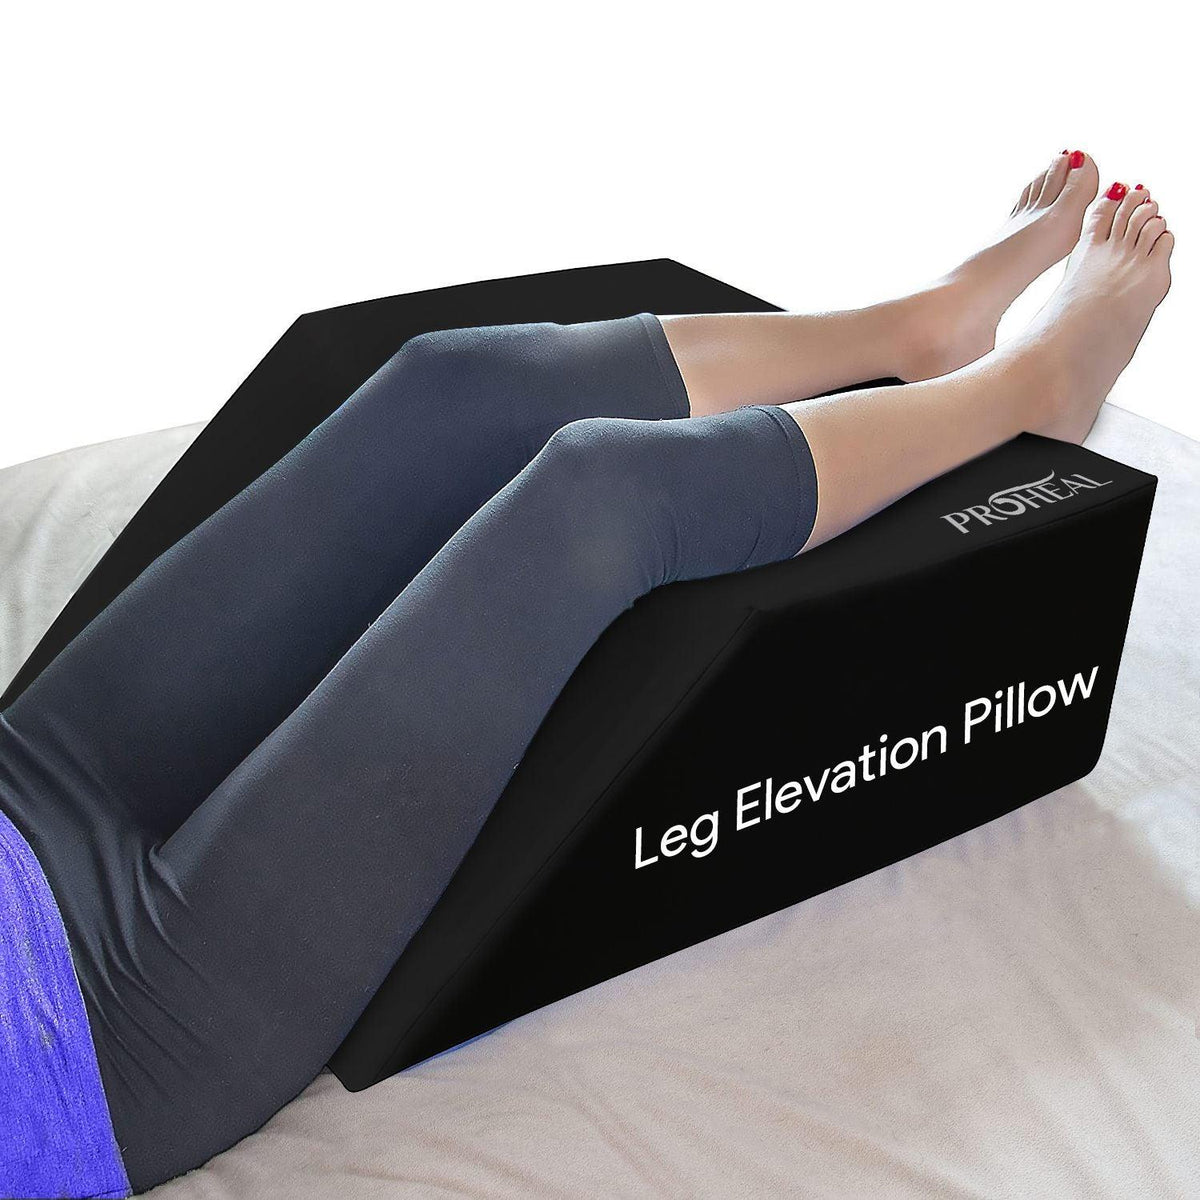 Extra Dense Knee Pillow for Side Sleepers, Between Leg Pillow by Cushion Lab